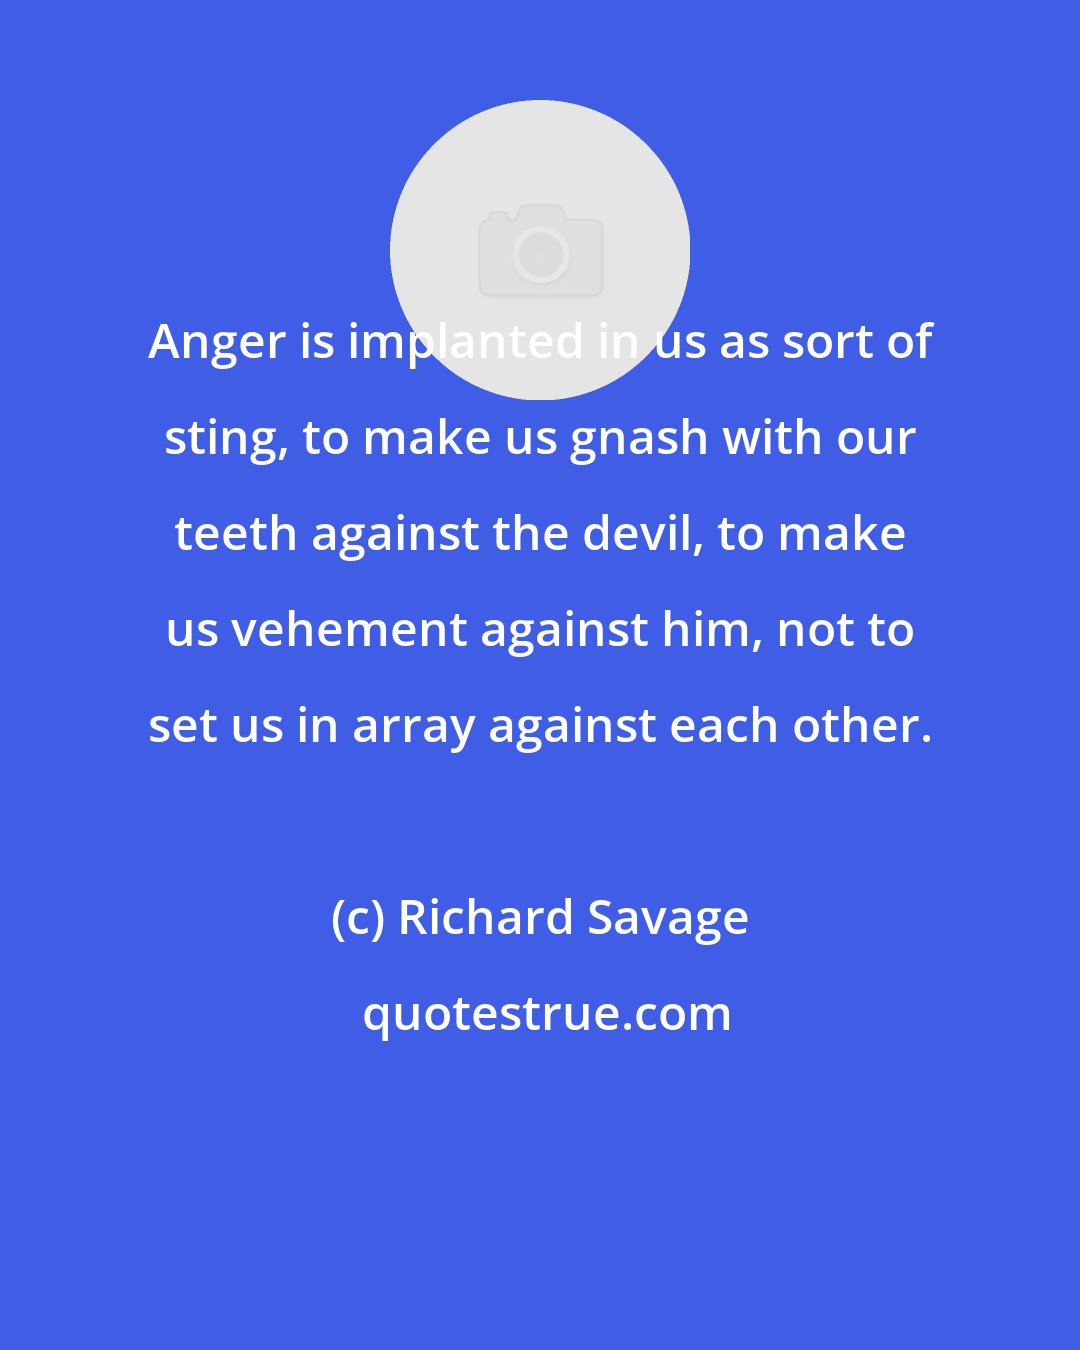 Richard Savage: Anger is implanted in us as sort of sting, to make us gnash with our teeth against the devil, to make us vehement against him, not to set us in array against each other.